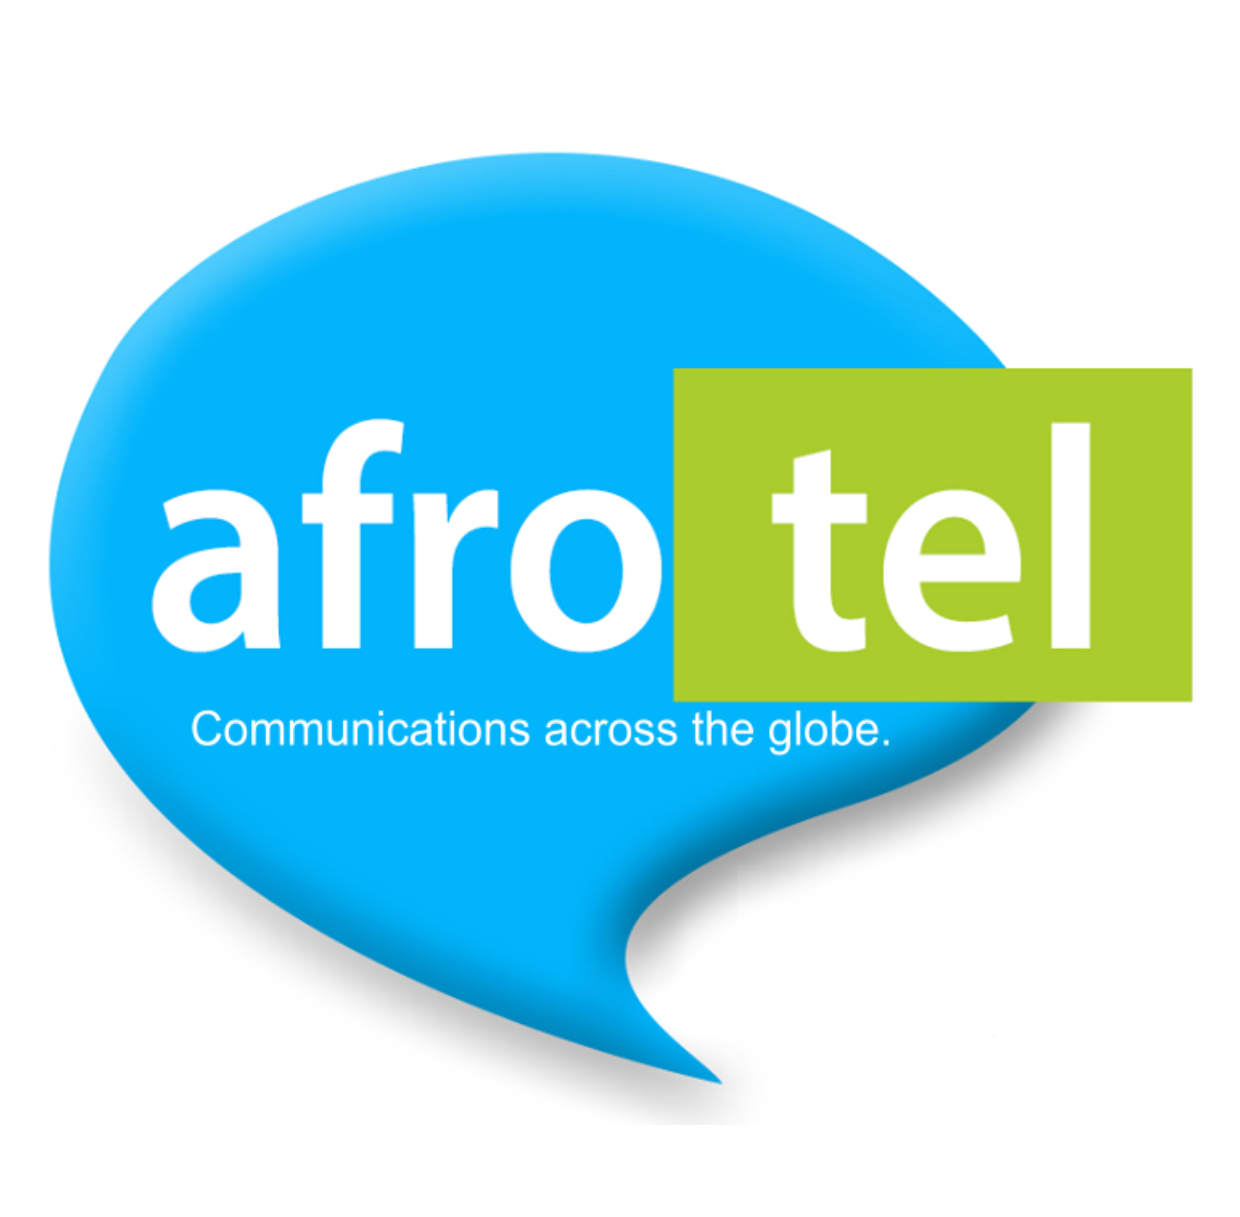 AFROTEL